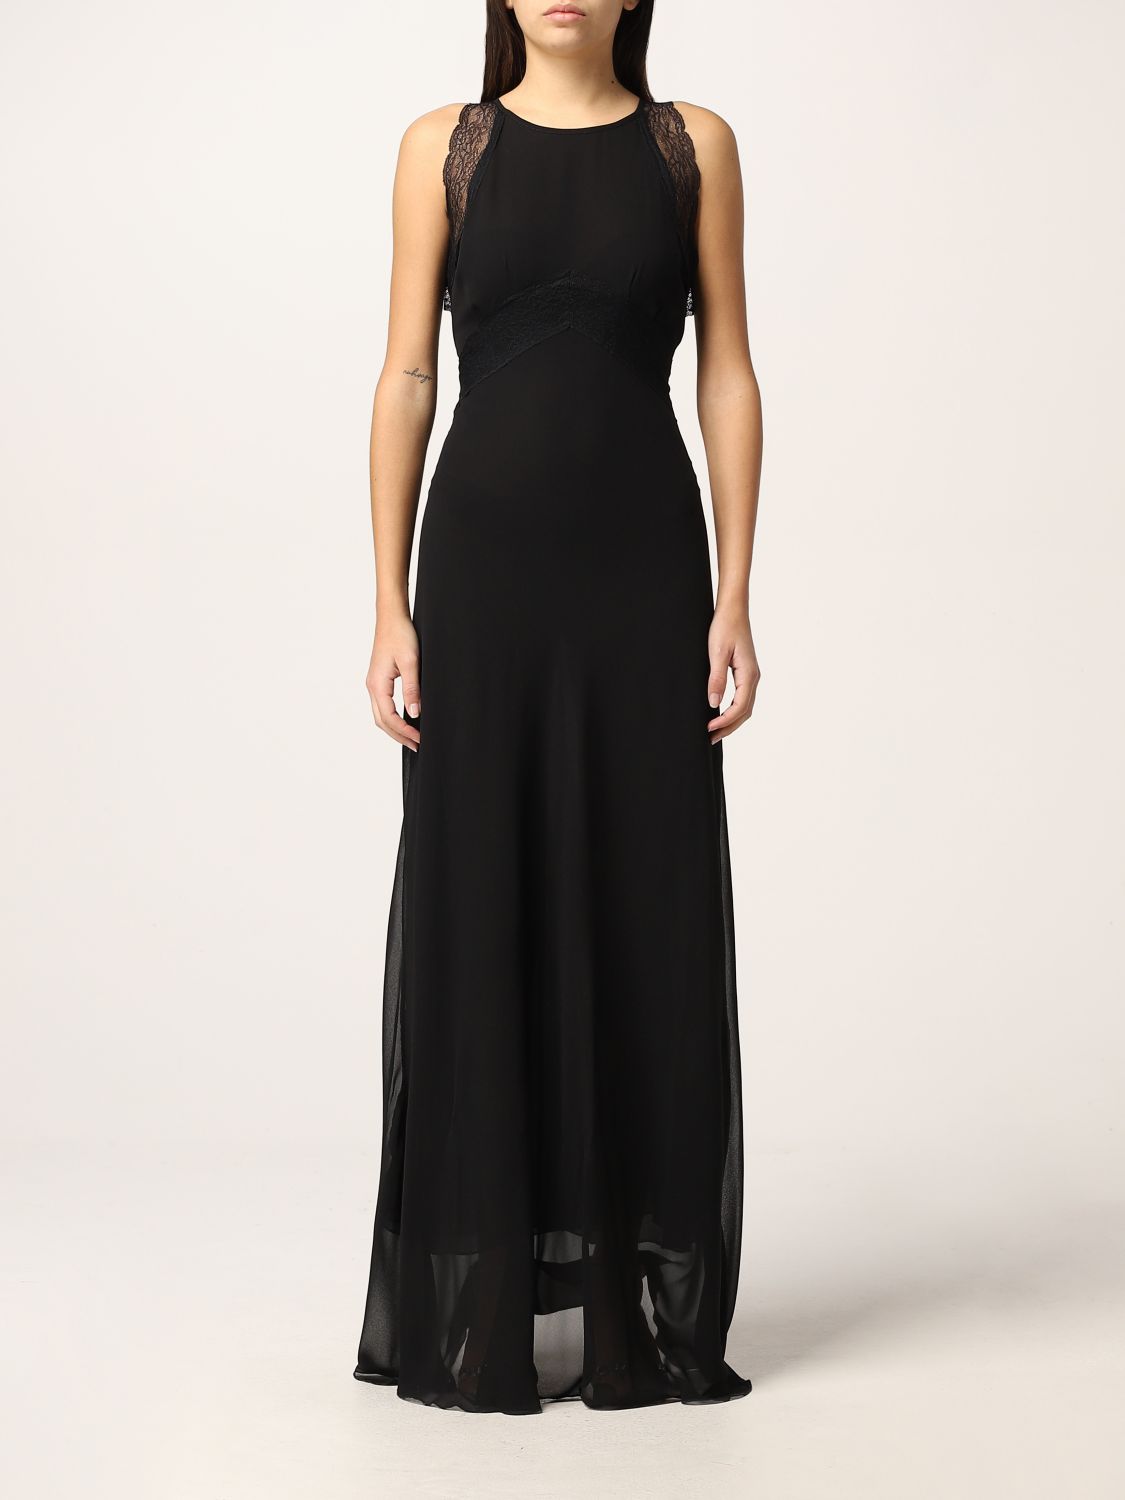 Anna Molinari Outlet: long dress with lace inserts - Black | Anna ...